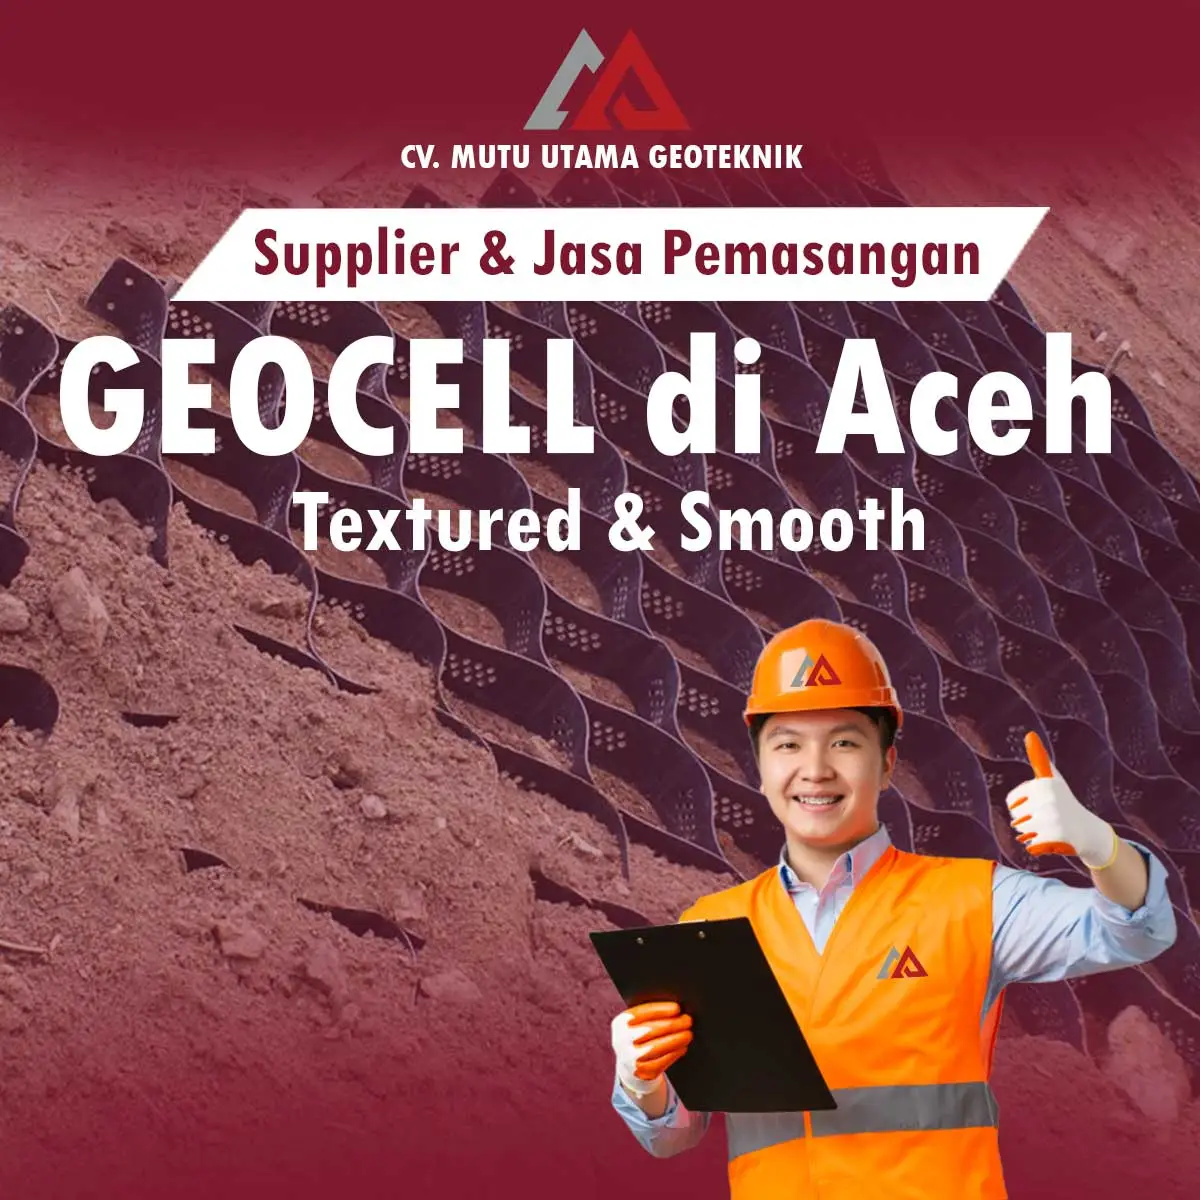 jual geocell aceh